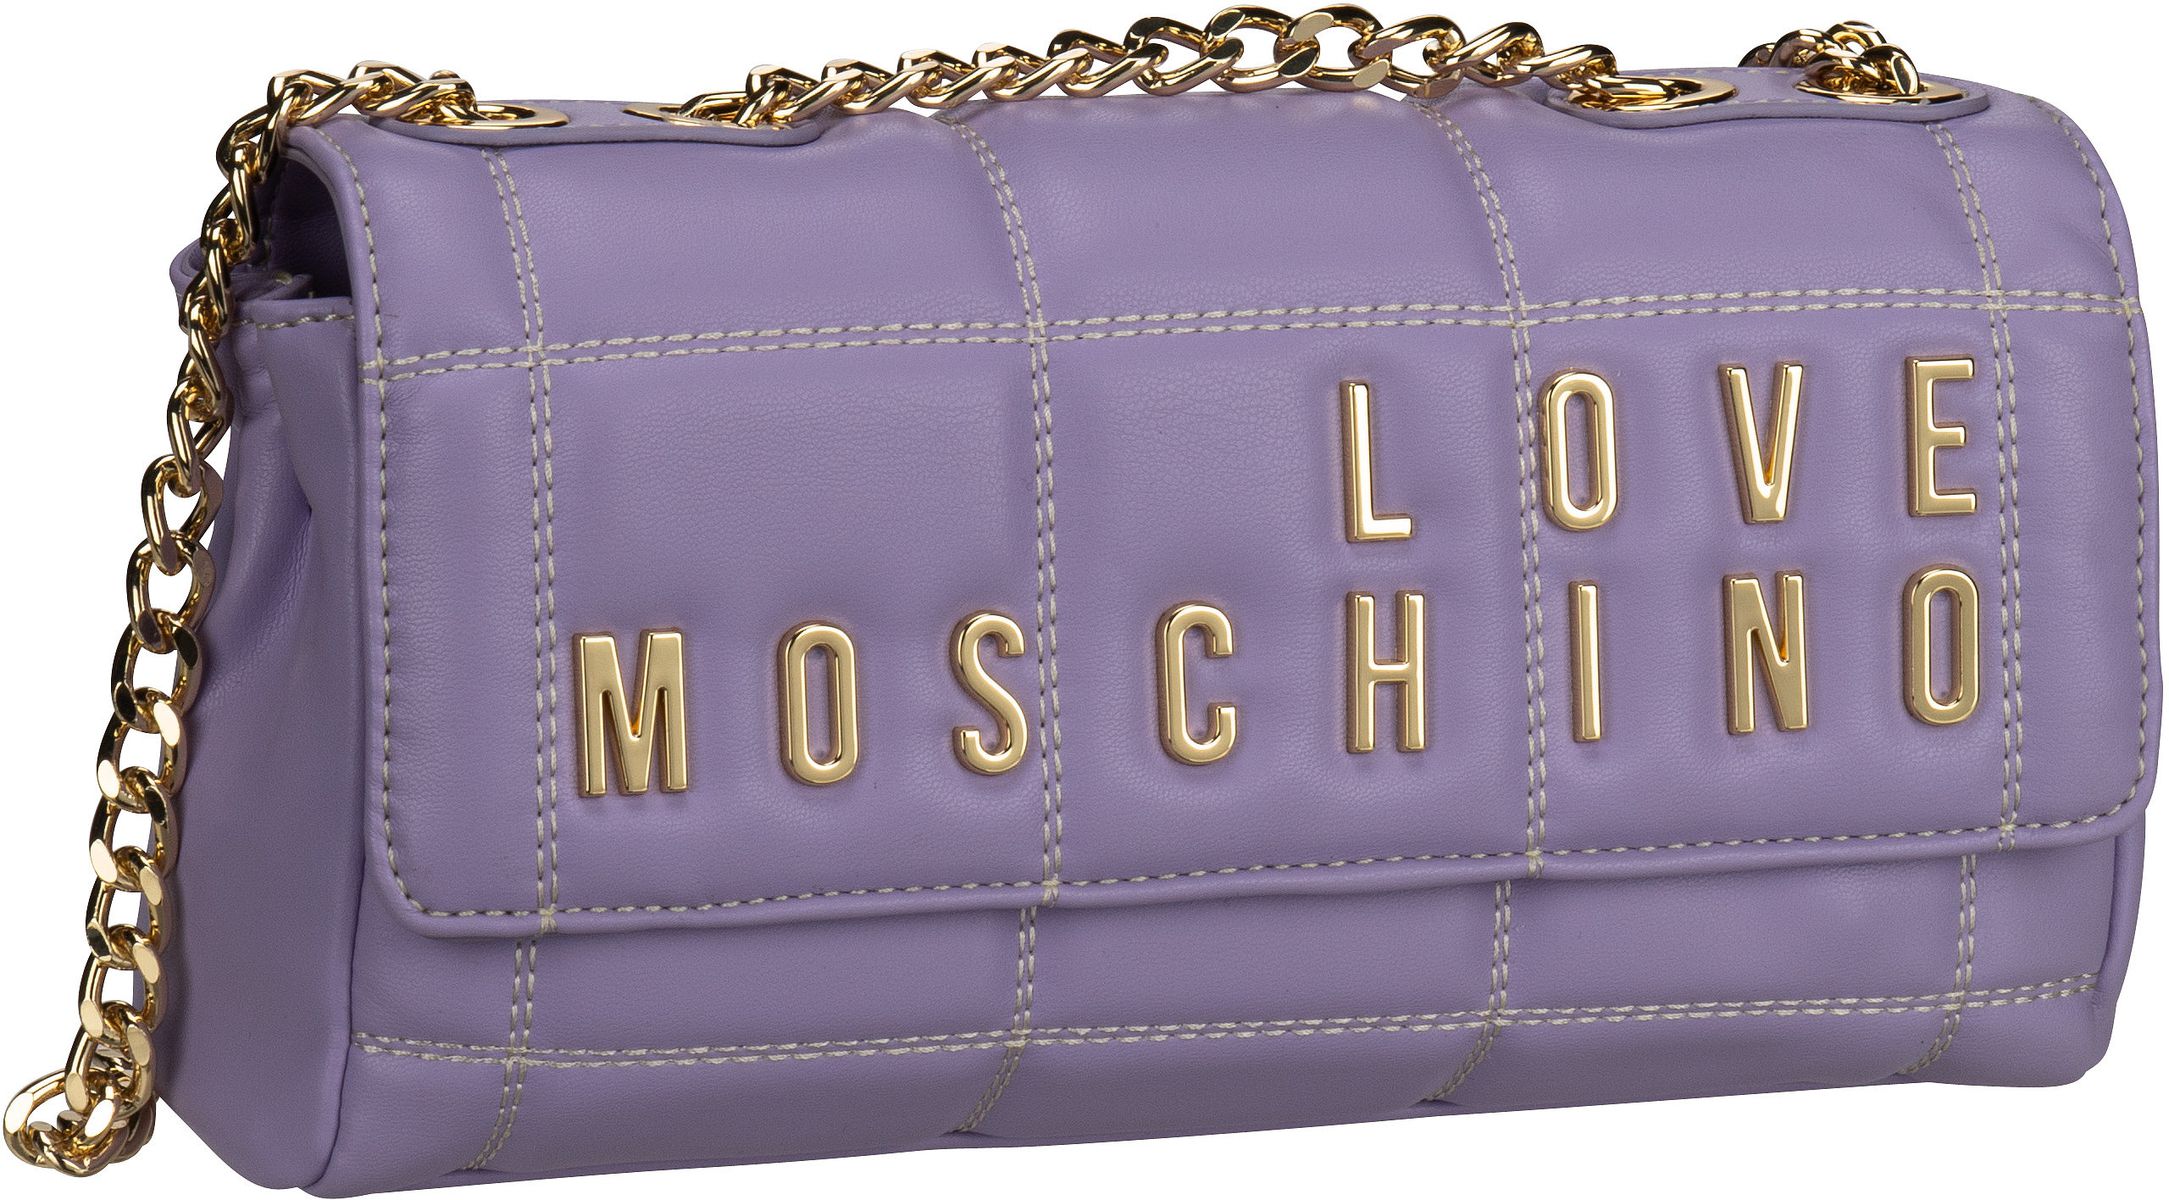 Love Moschino Embroidery Quilted Shoulder Bag 4260 - Lilac